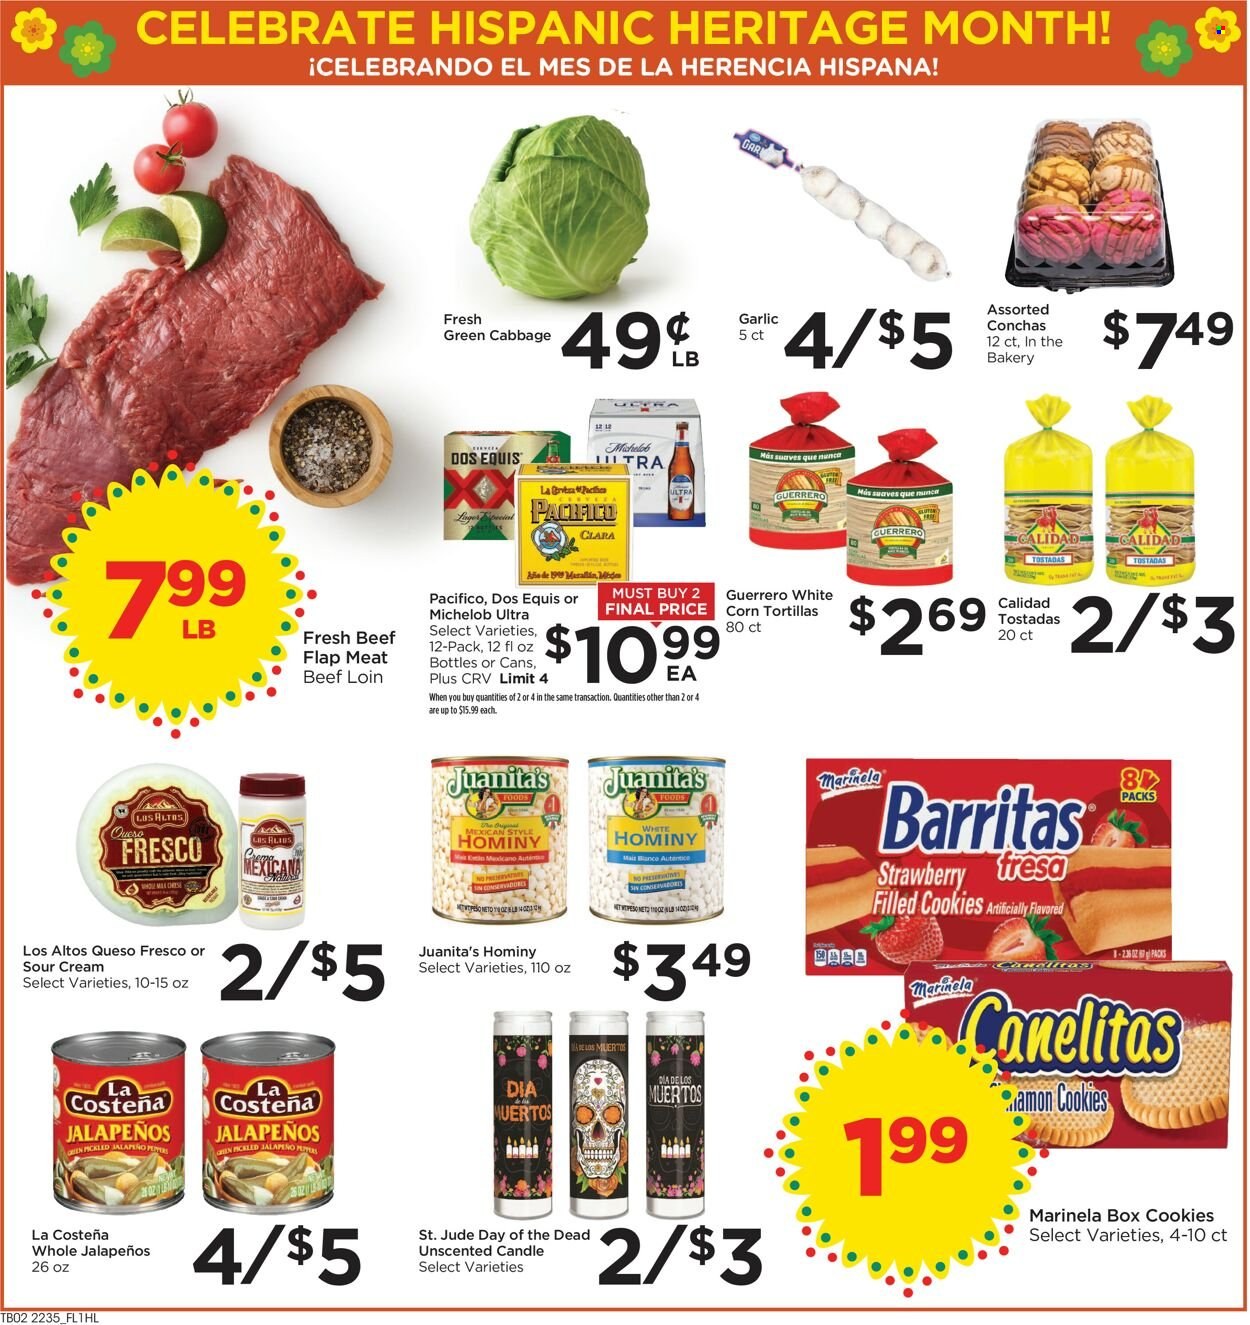 thumbnail - Food 4 Less Flyer - 09/28/2022 - 10/04/2022 - Sales products - corn tortillas, tortillas, tostadas, cabbage, garlic, jalapeño, queso fresco, sour cream, cookies, beer, candle, Dos Equis, Michelob. Page 3.